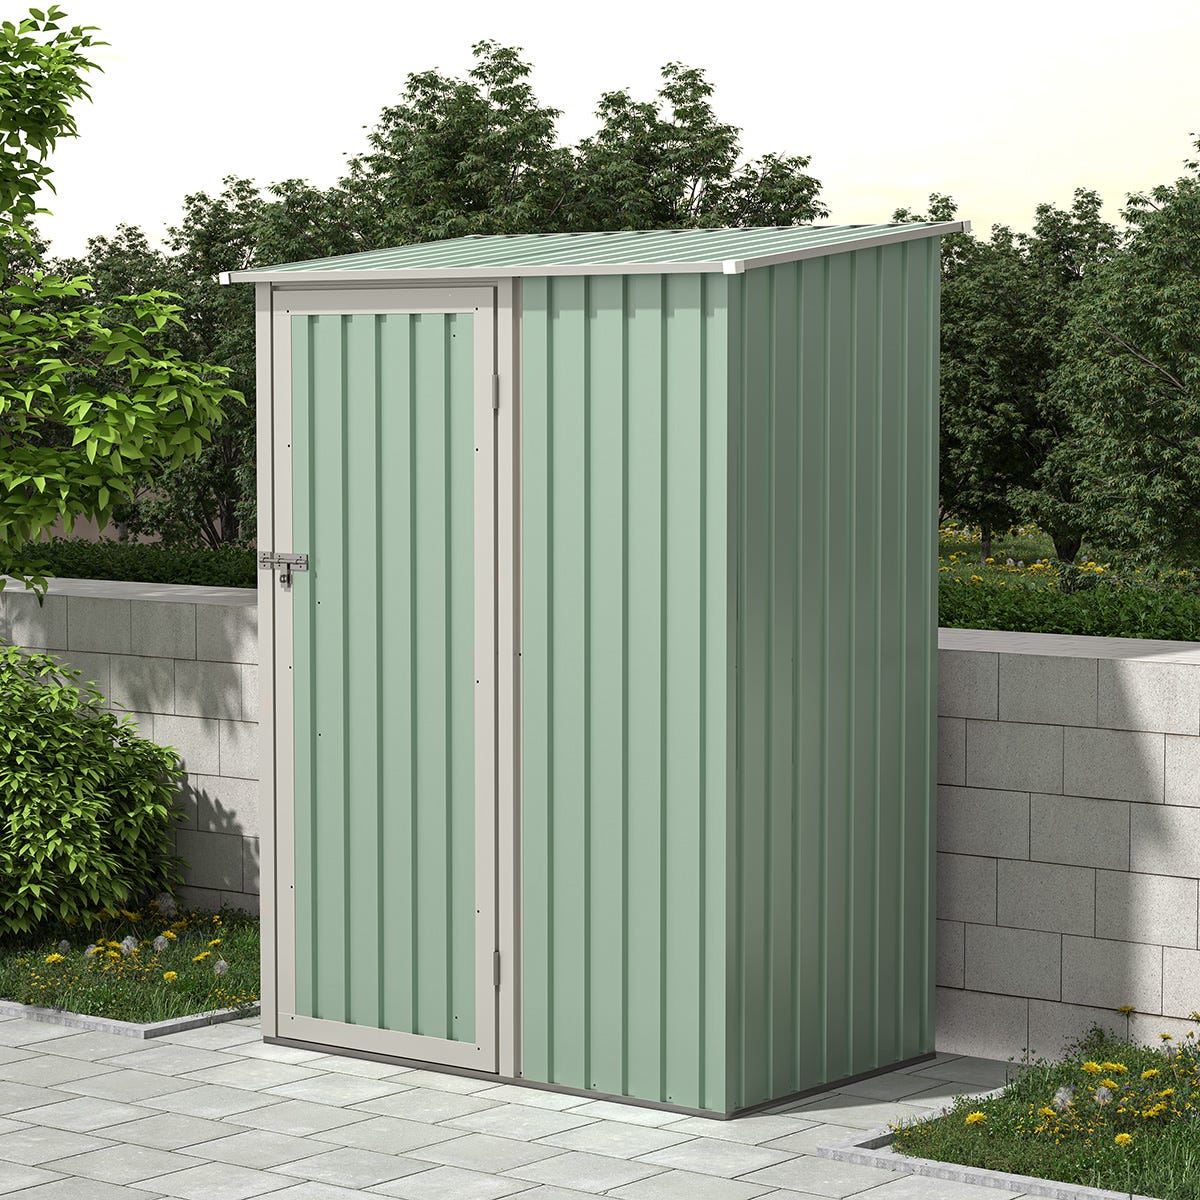 Charles Bentley Metal Storage Shed 47ft X 3ft Green